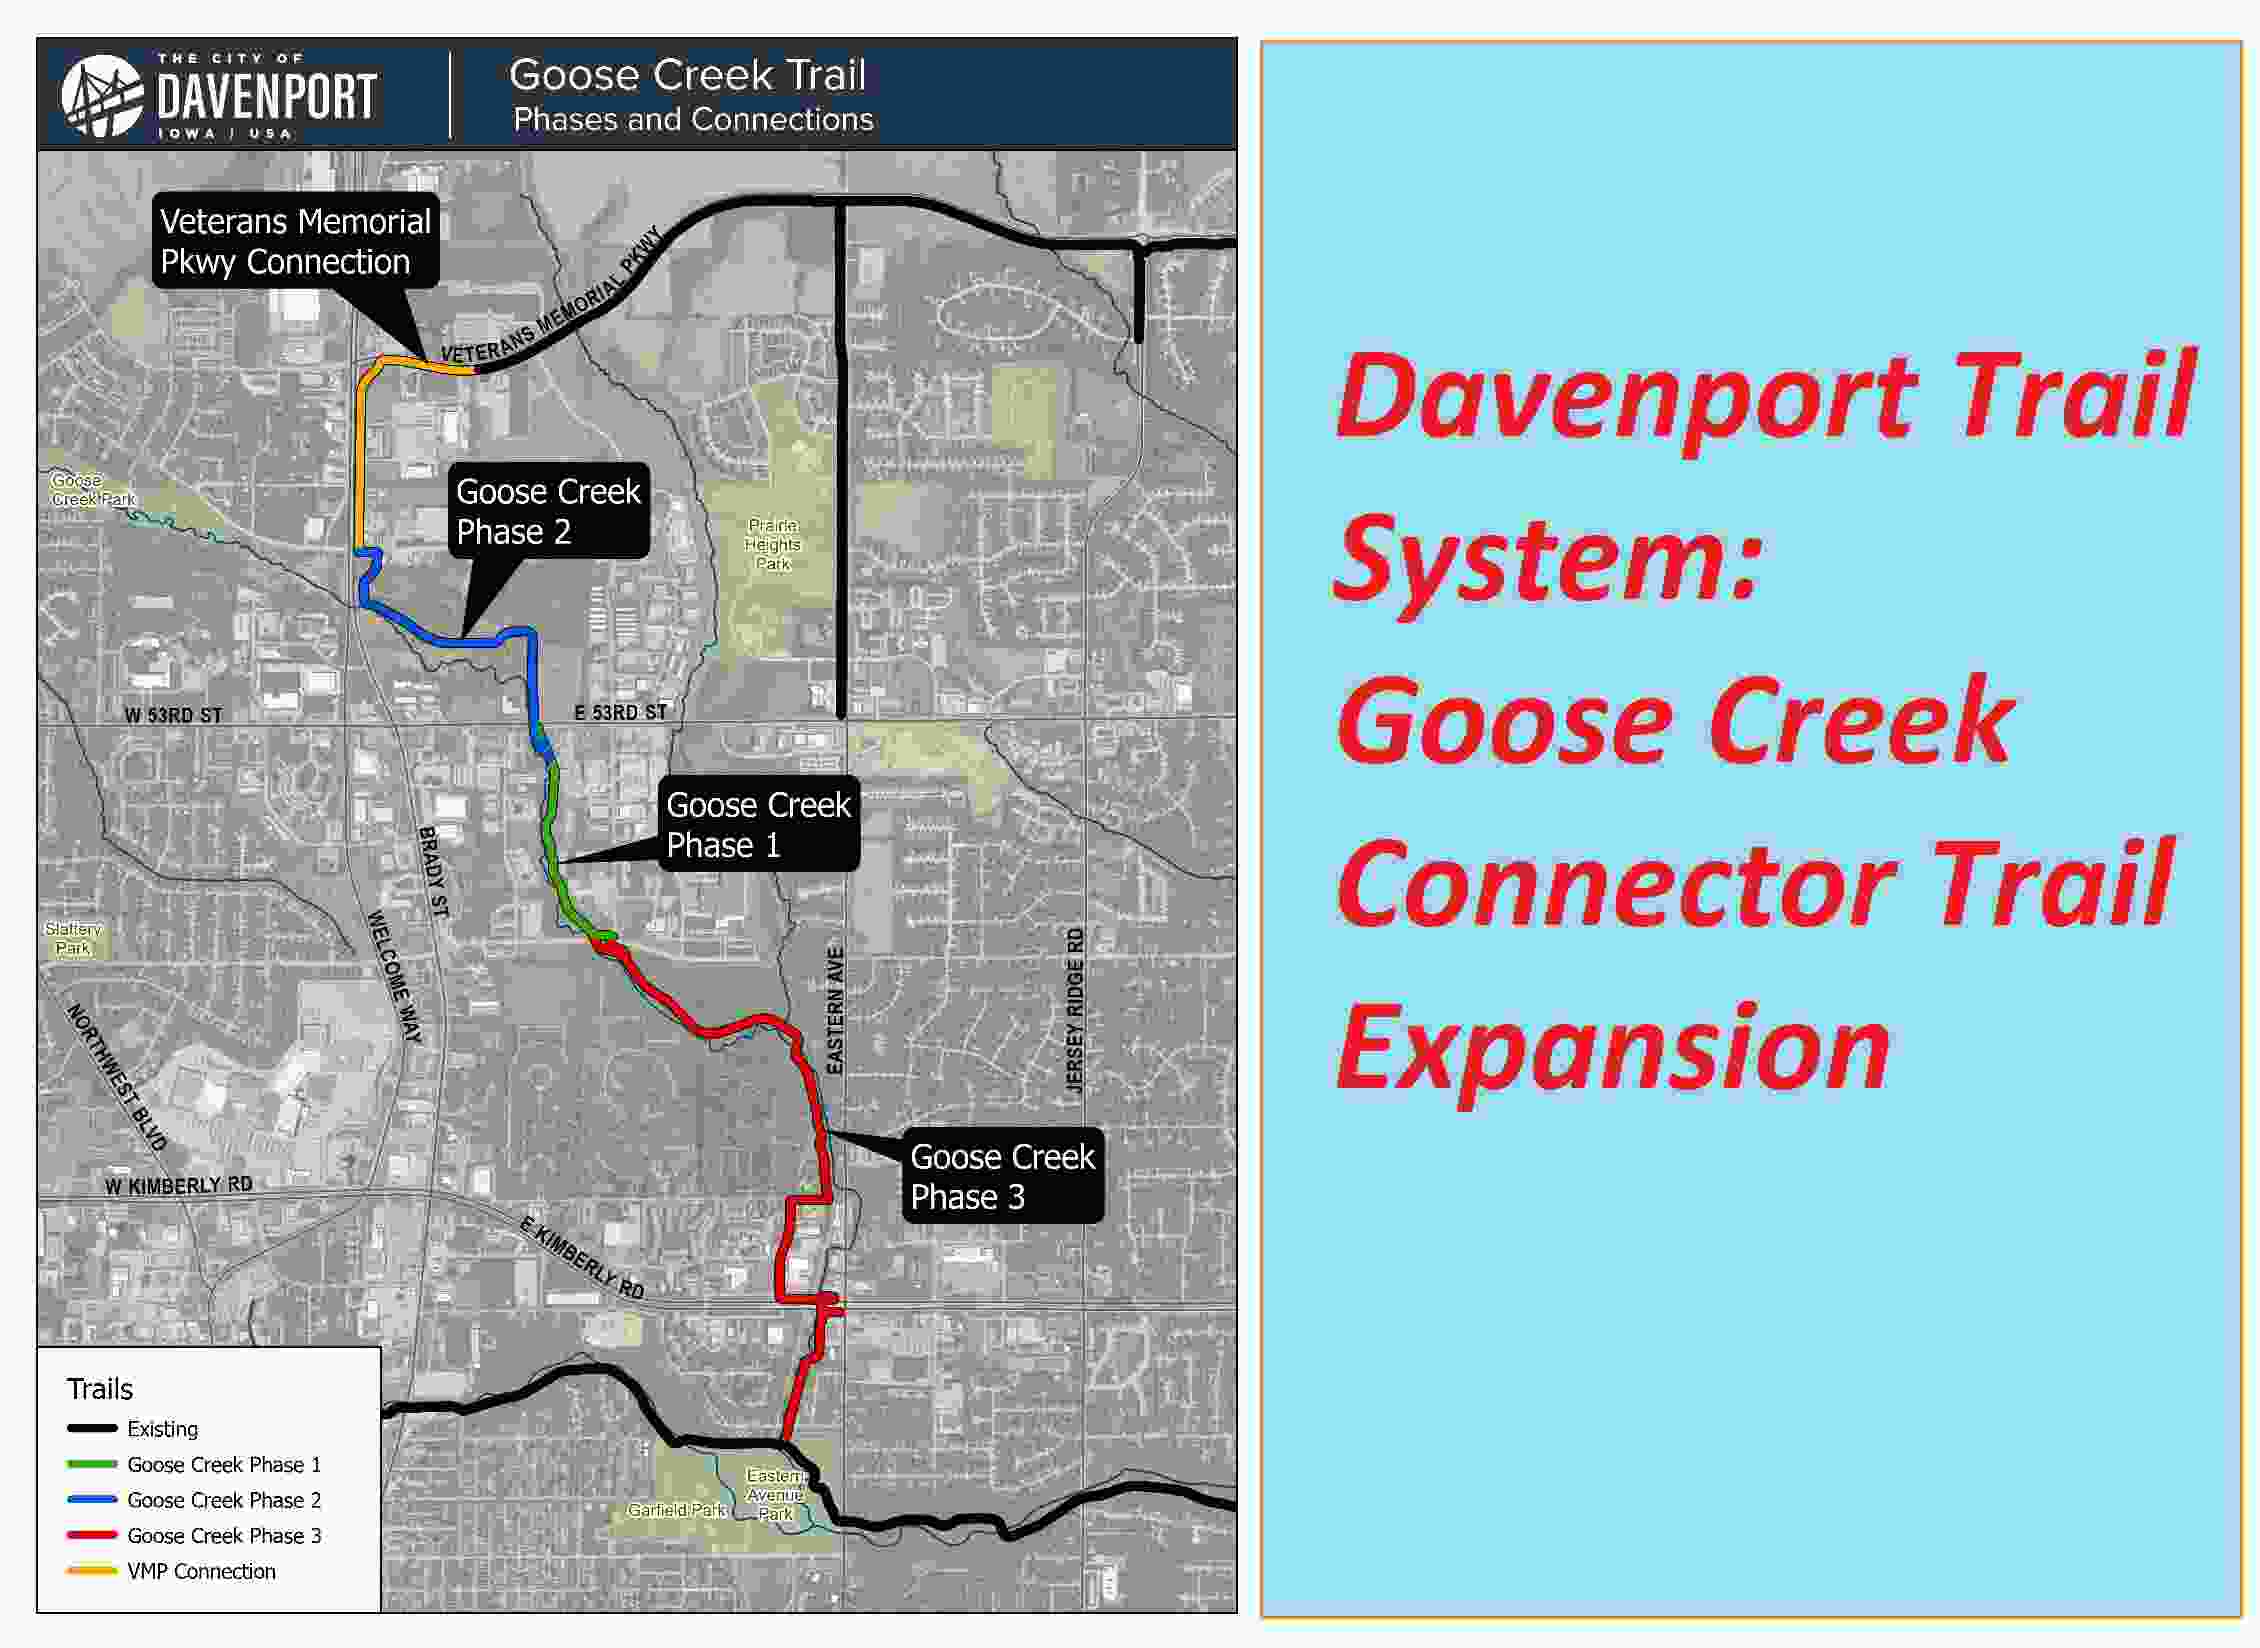 Goose Creek Connector Trail expansion